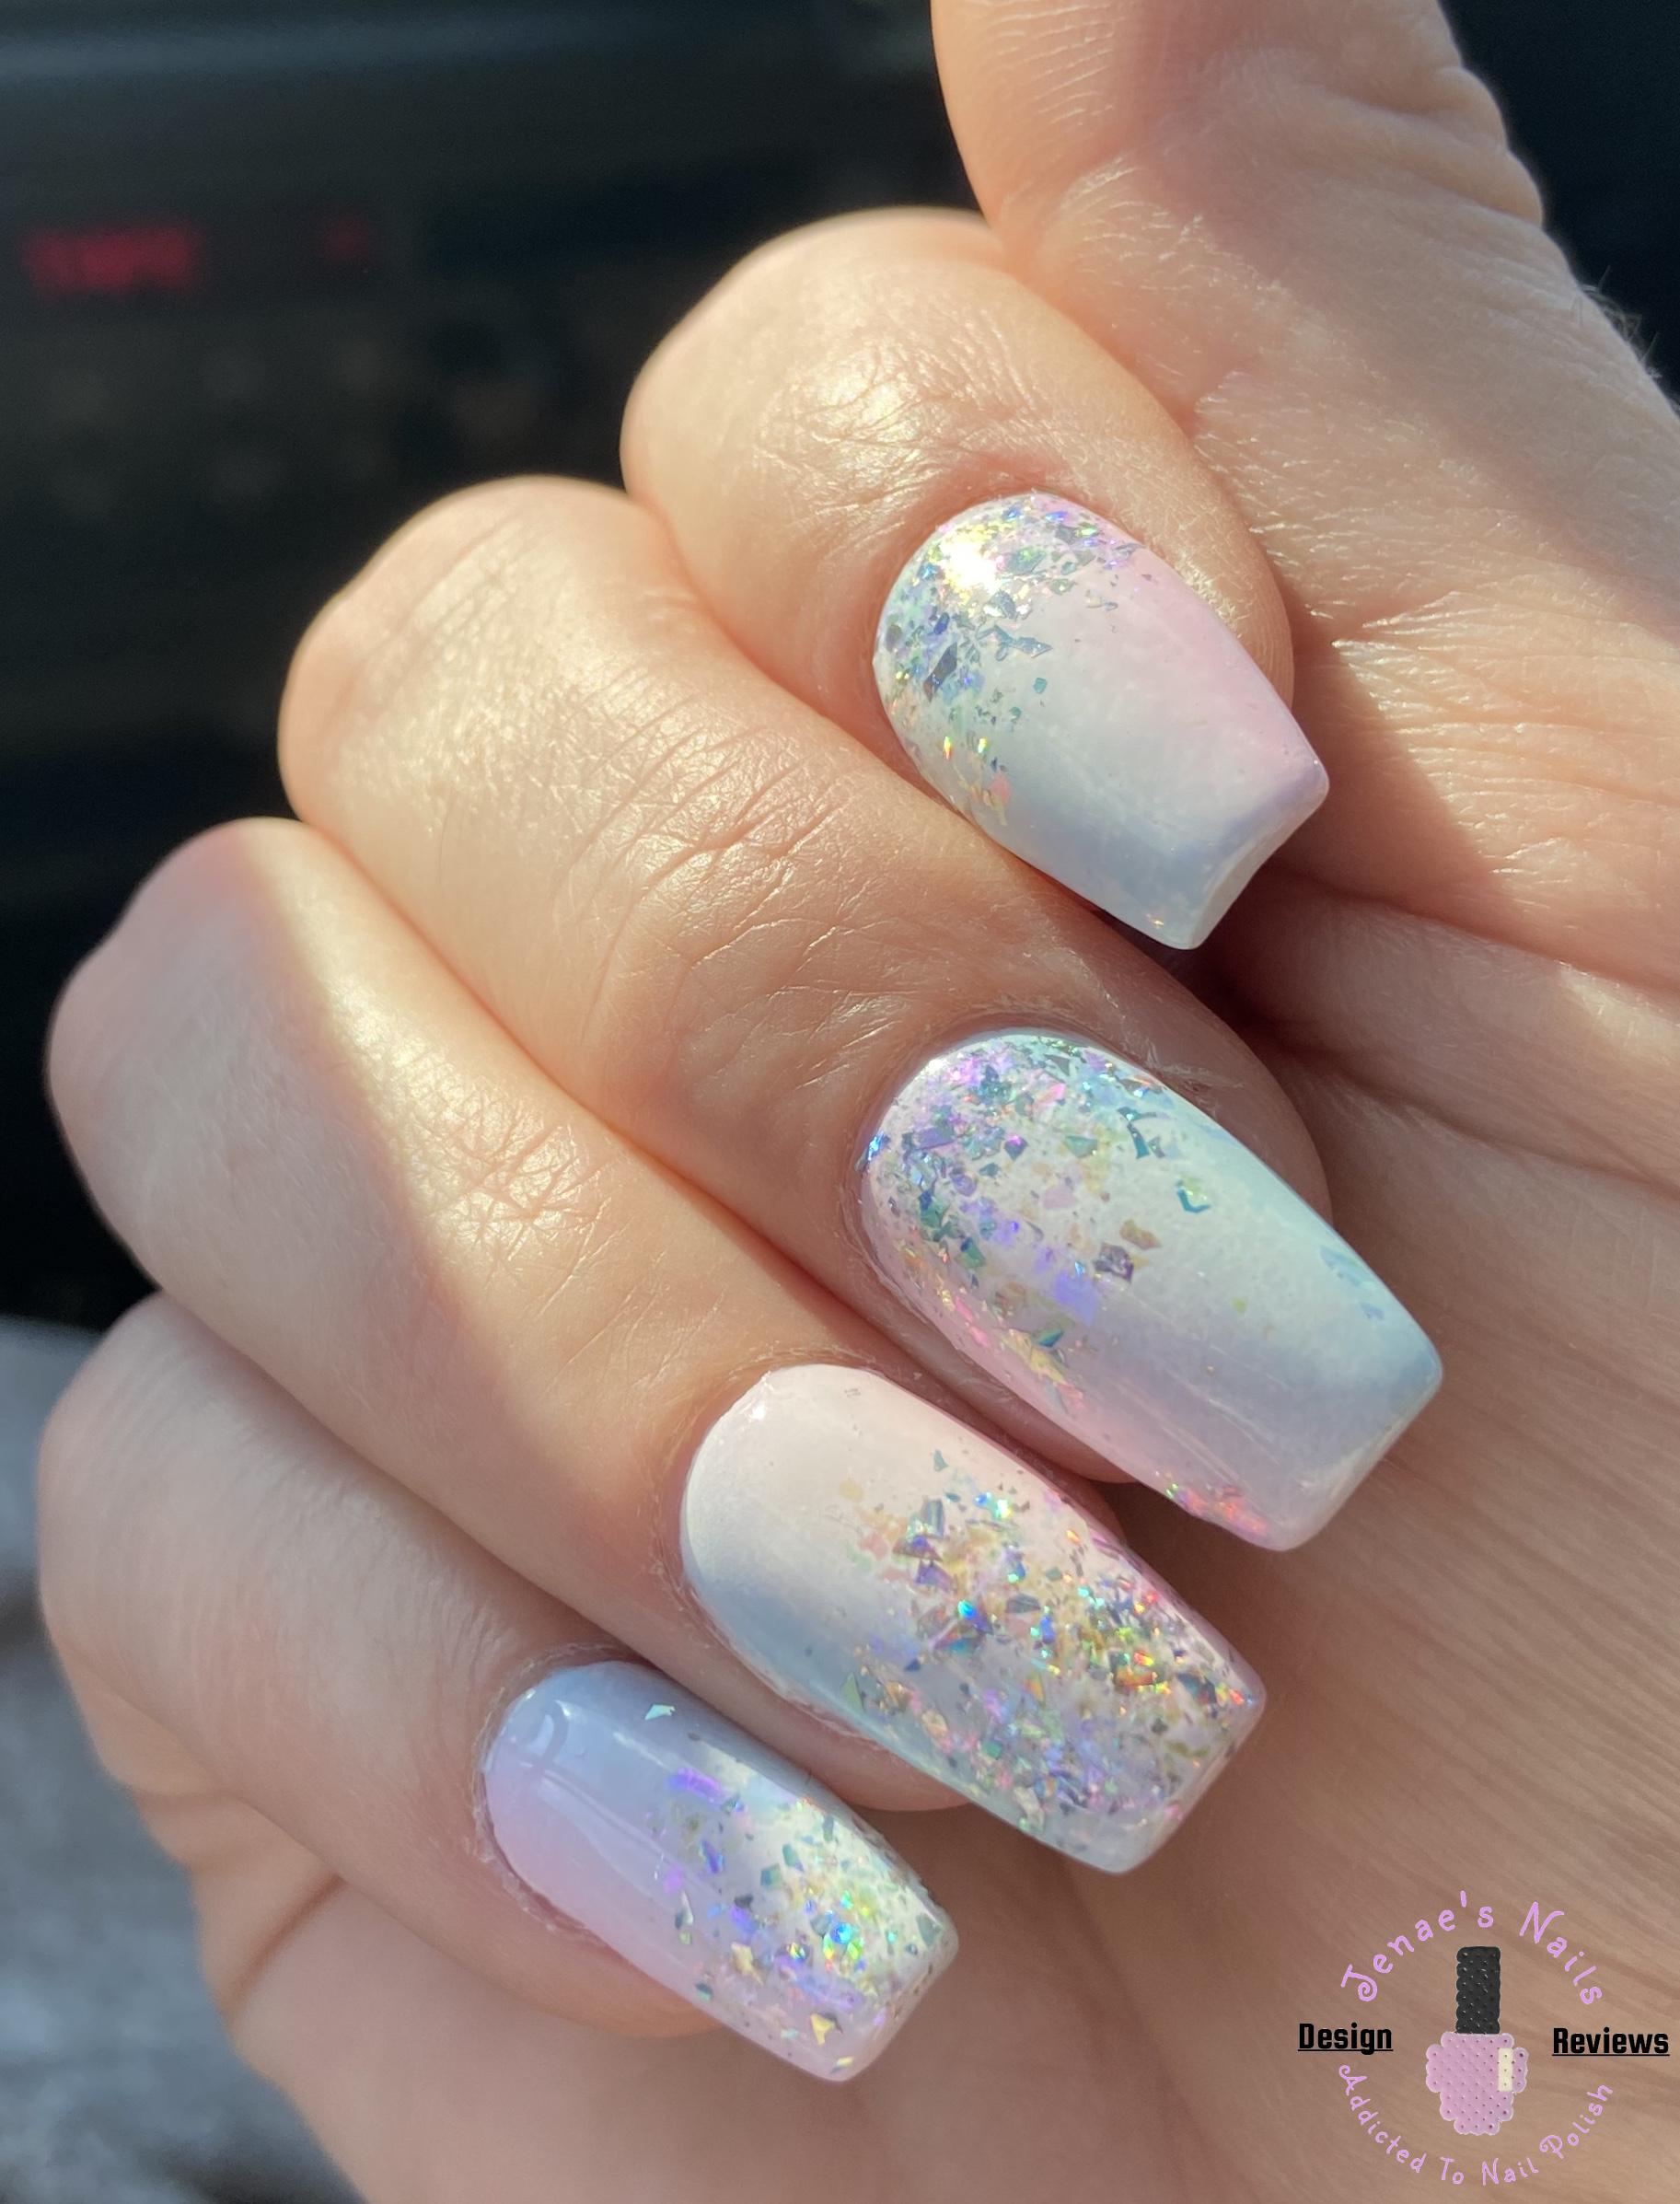 Pink and Blue Ombré Nails with Iridescent Flakies